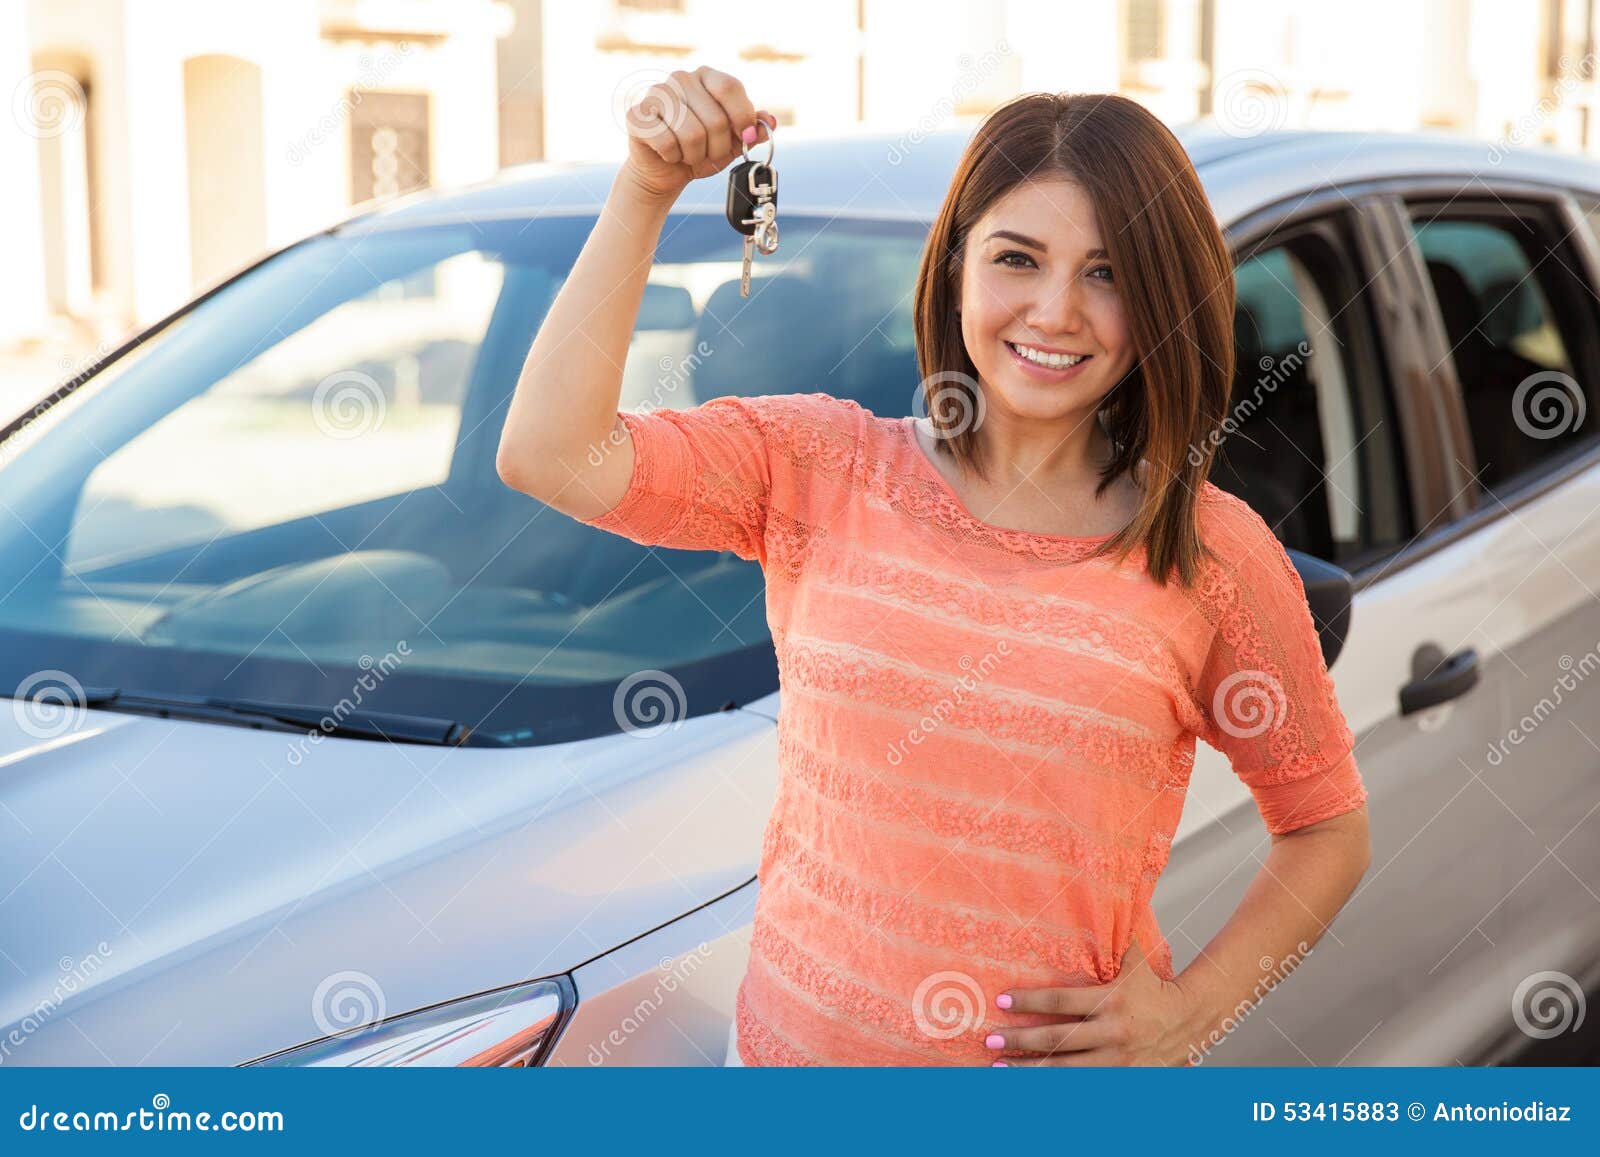 I just bought a car! stock image. Image of copy, beautiful - 53415883